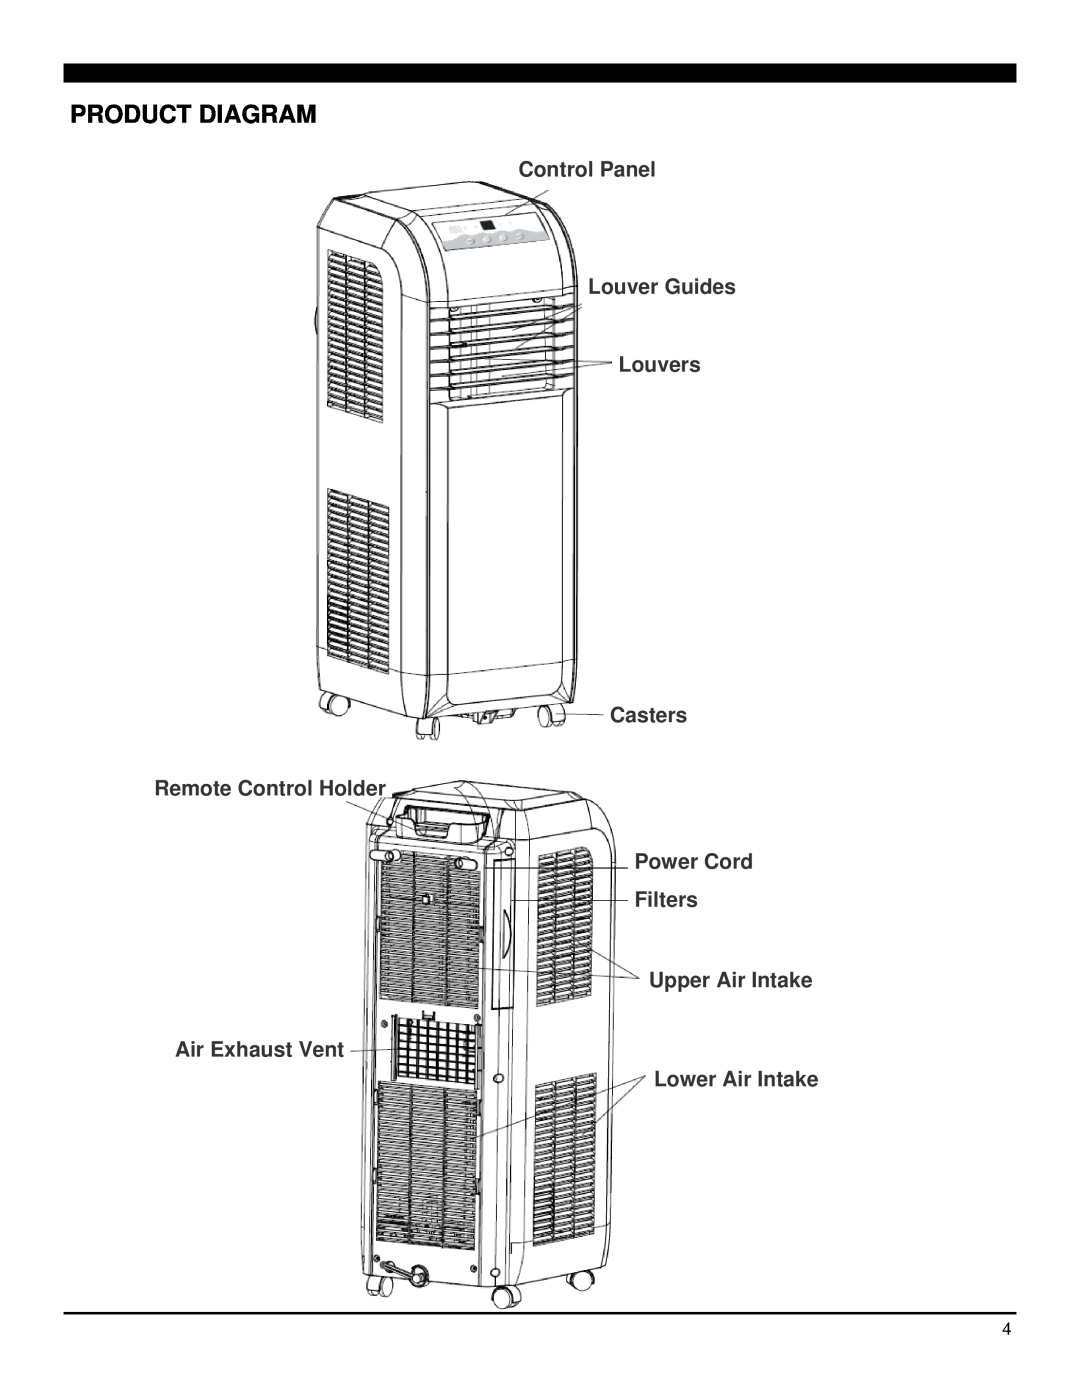 Soleus Air GB-PAC-08E4 Product Diagram, Control Panel Louver Guides Louvers Casters, Upper Air Intake Air Exhaust Vent 